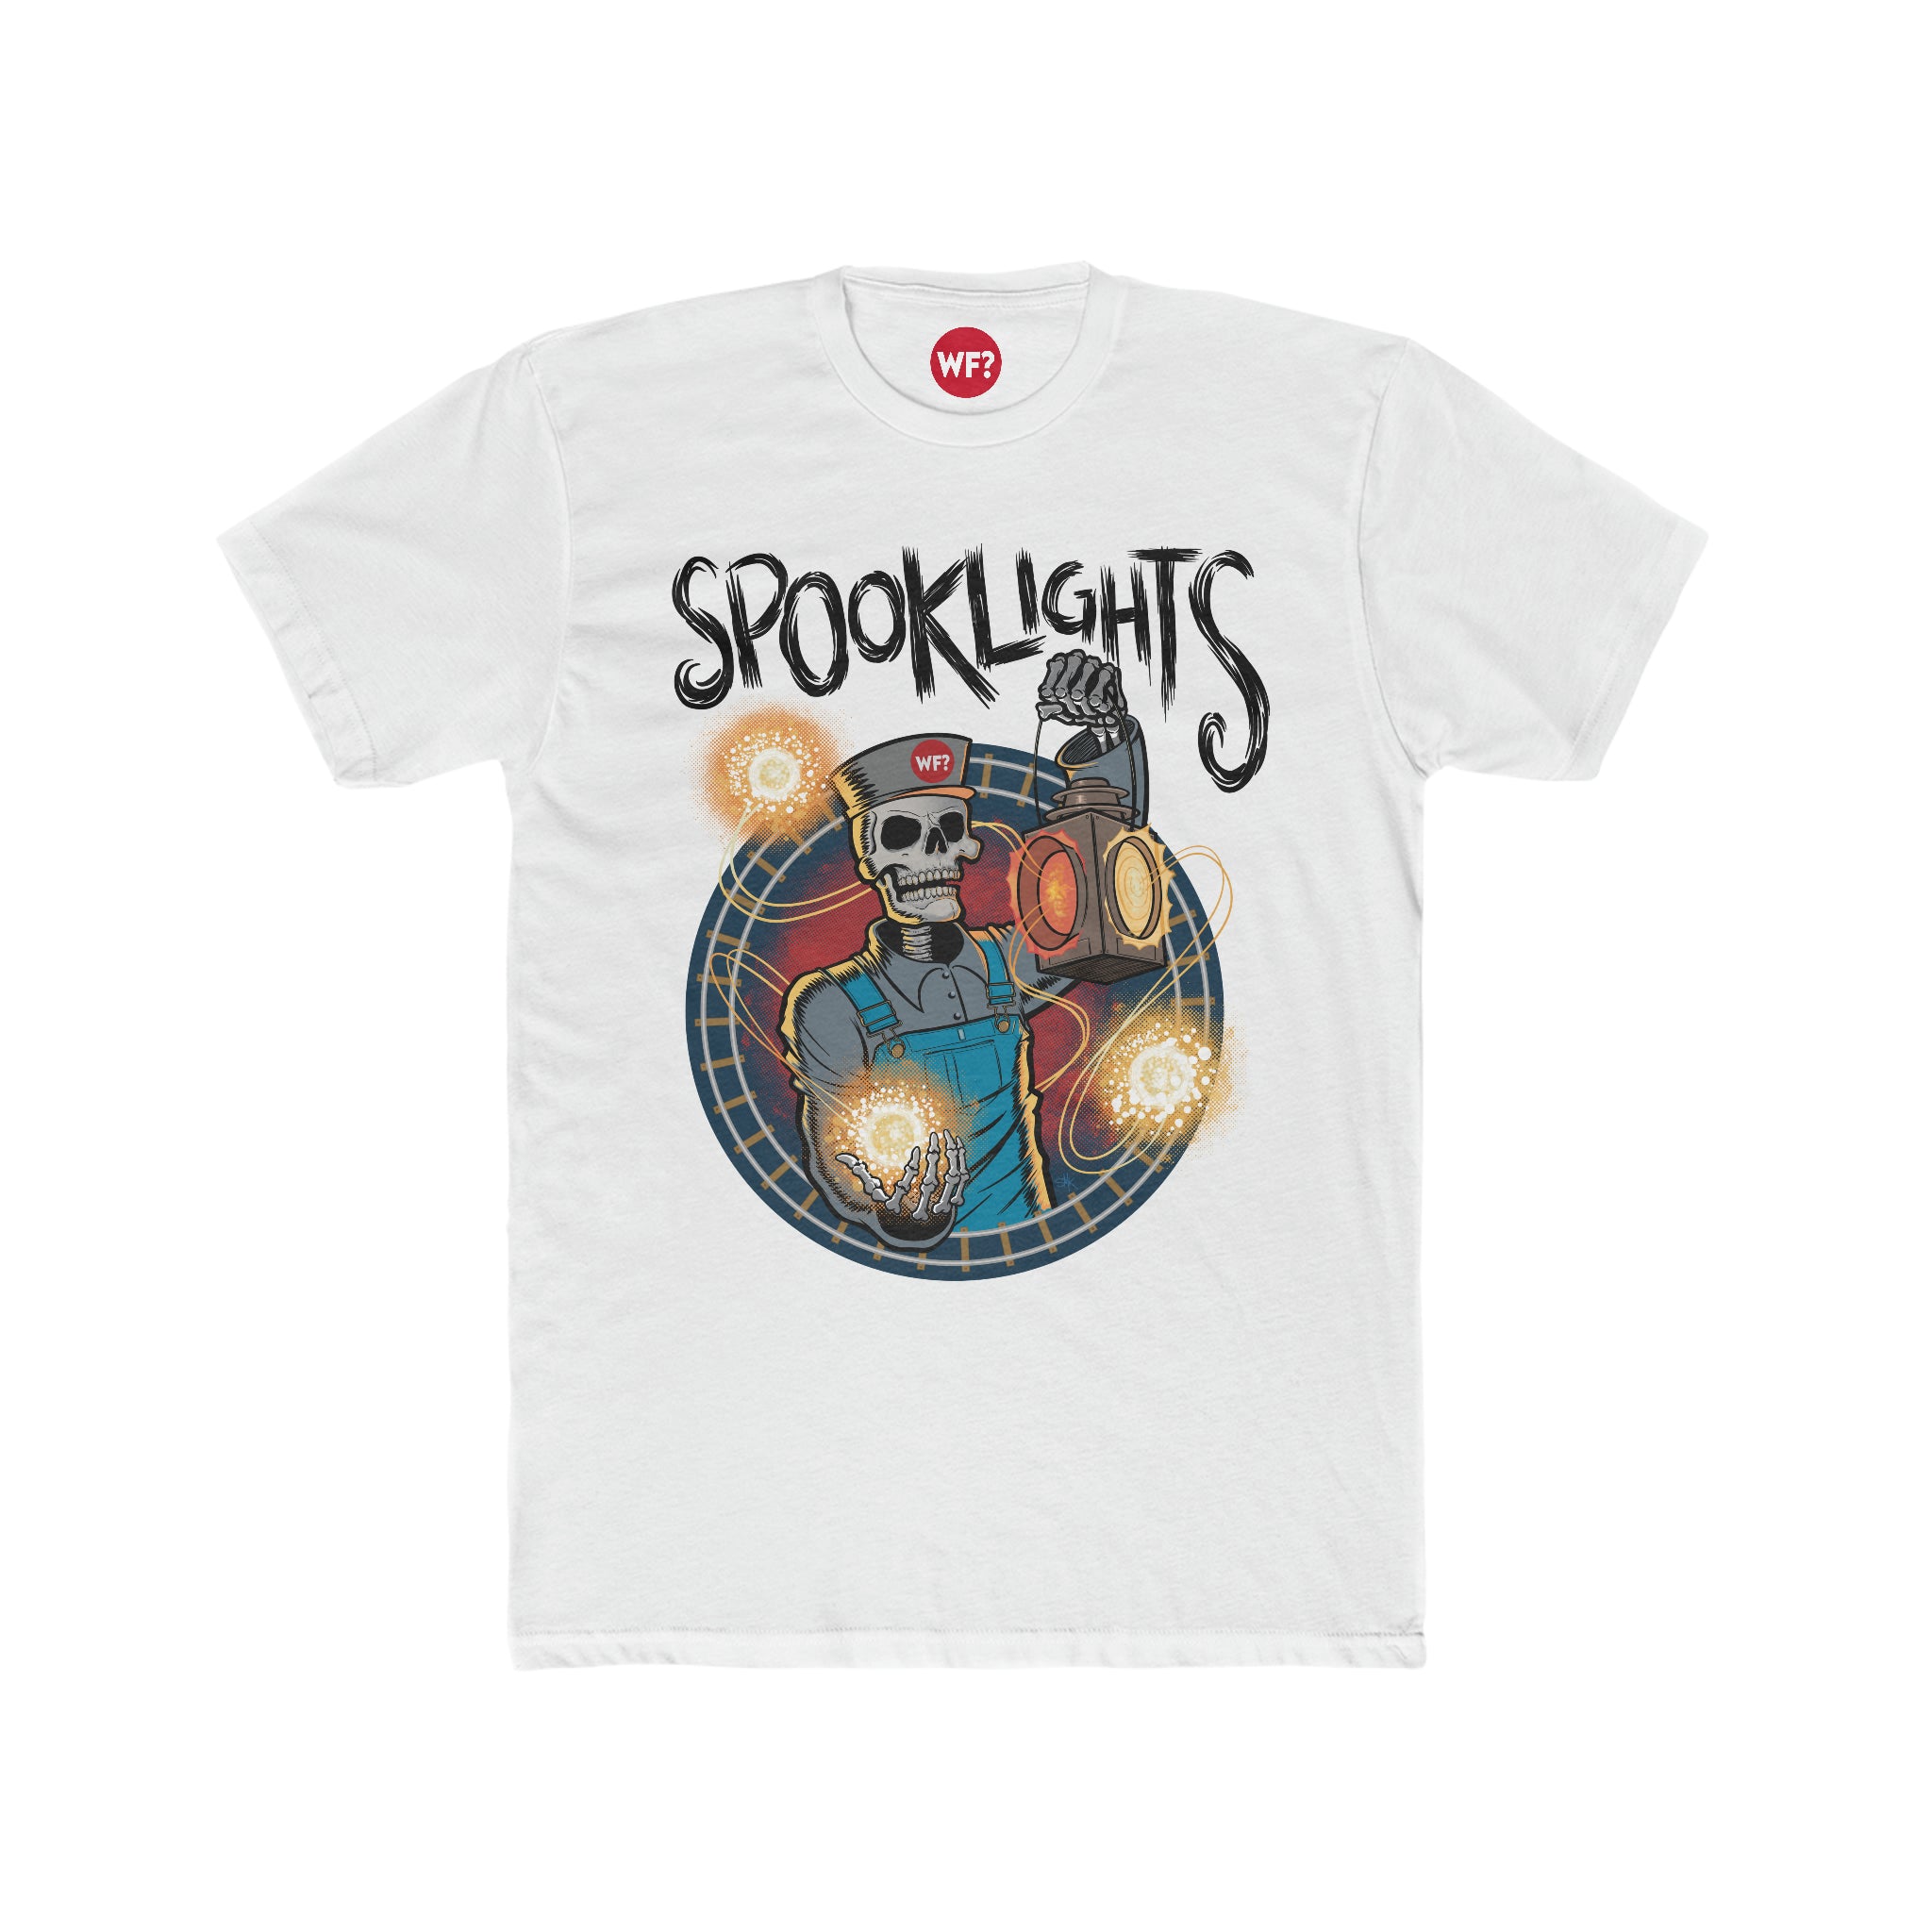 Spooklights Limited T-Shirt